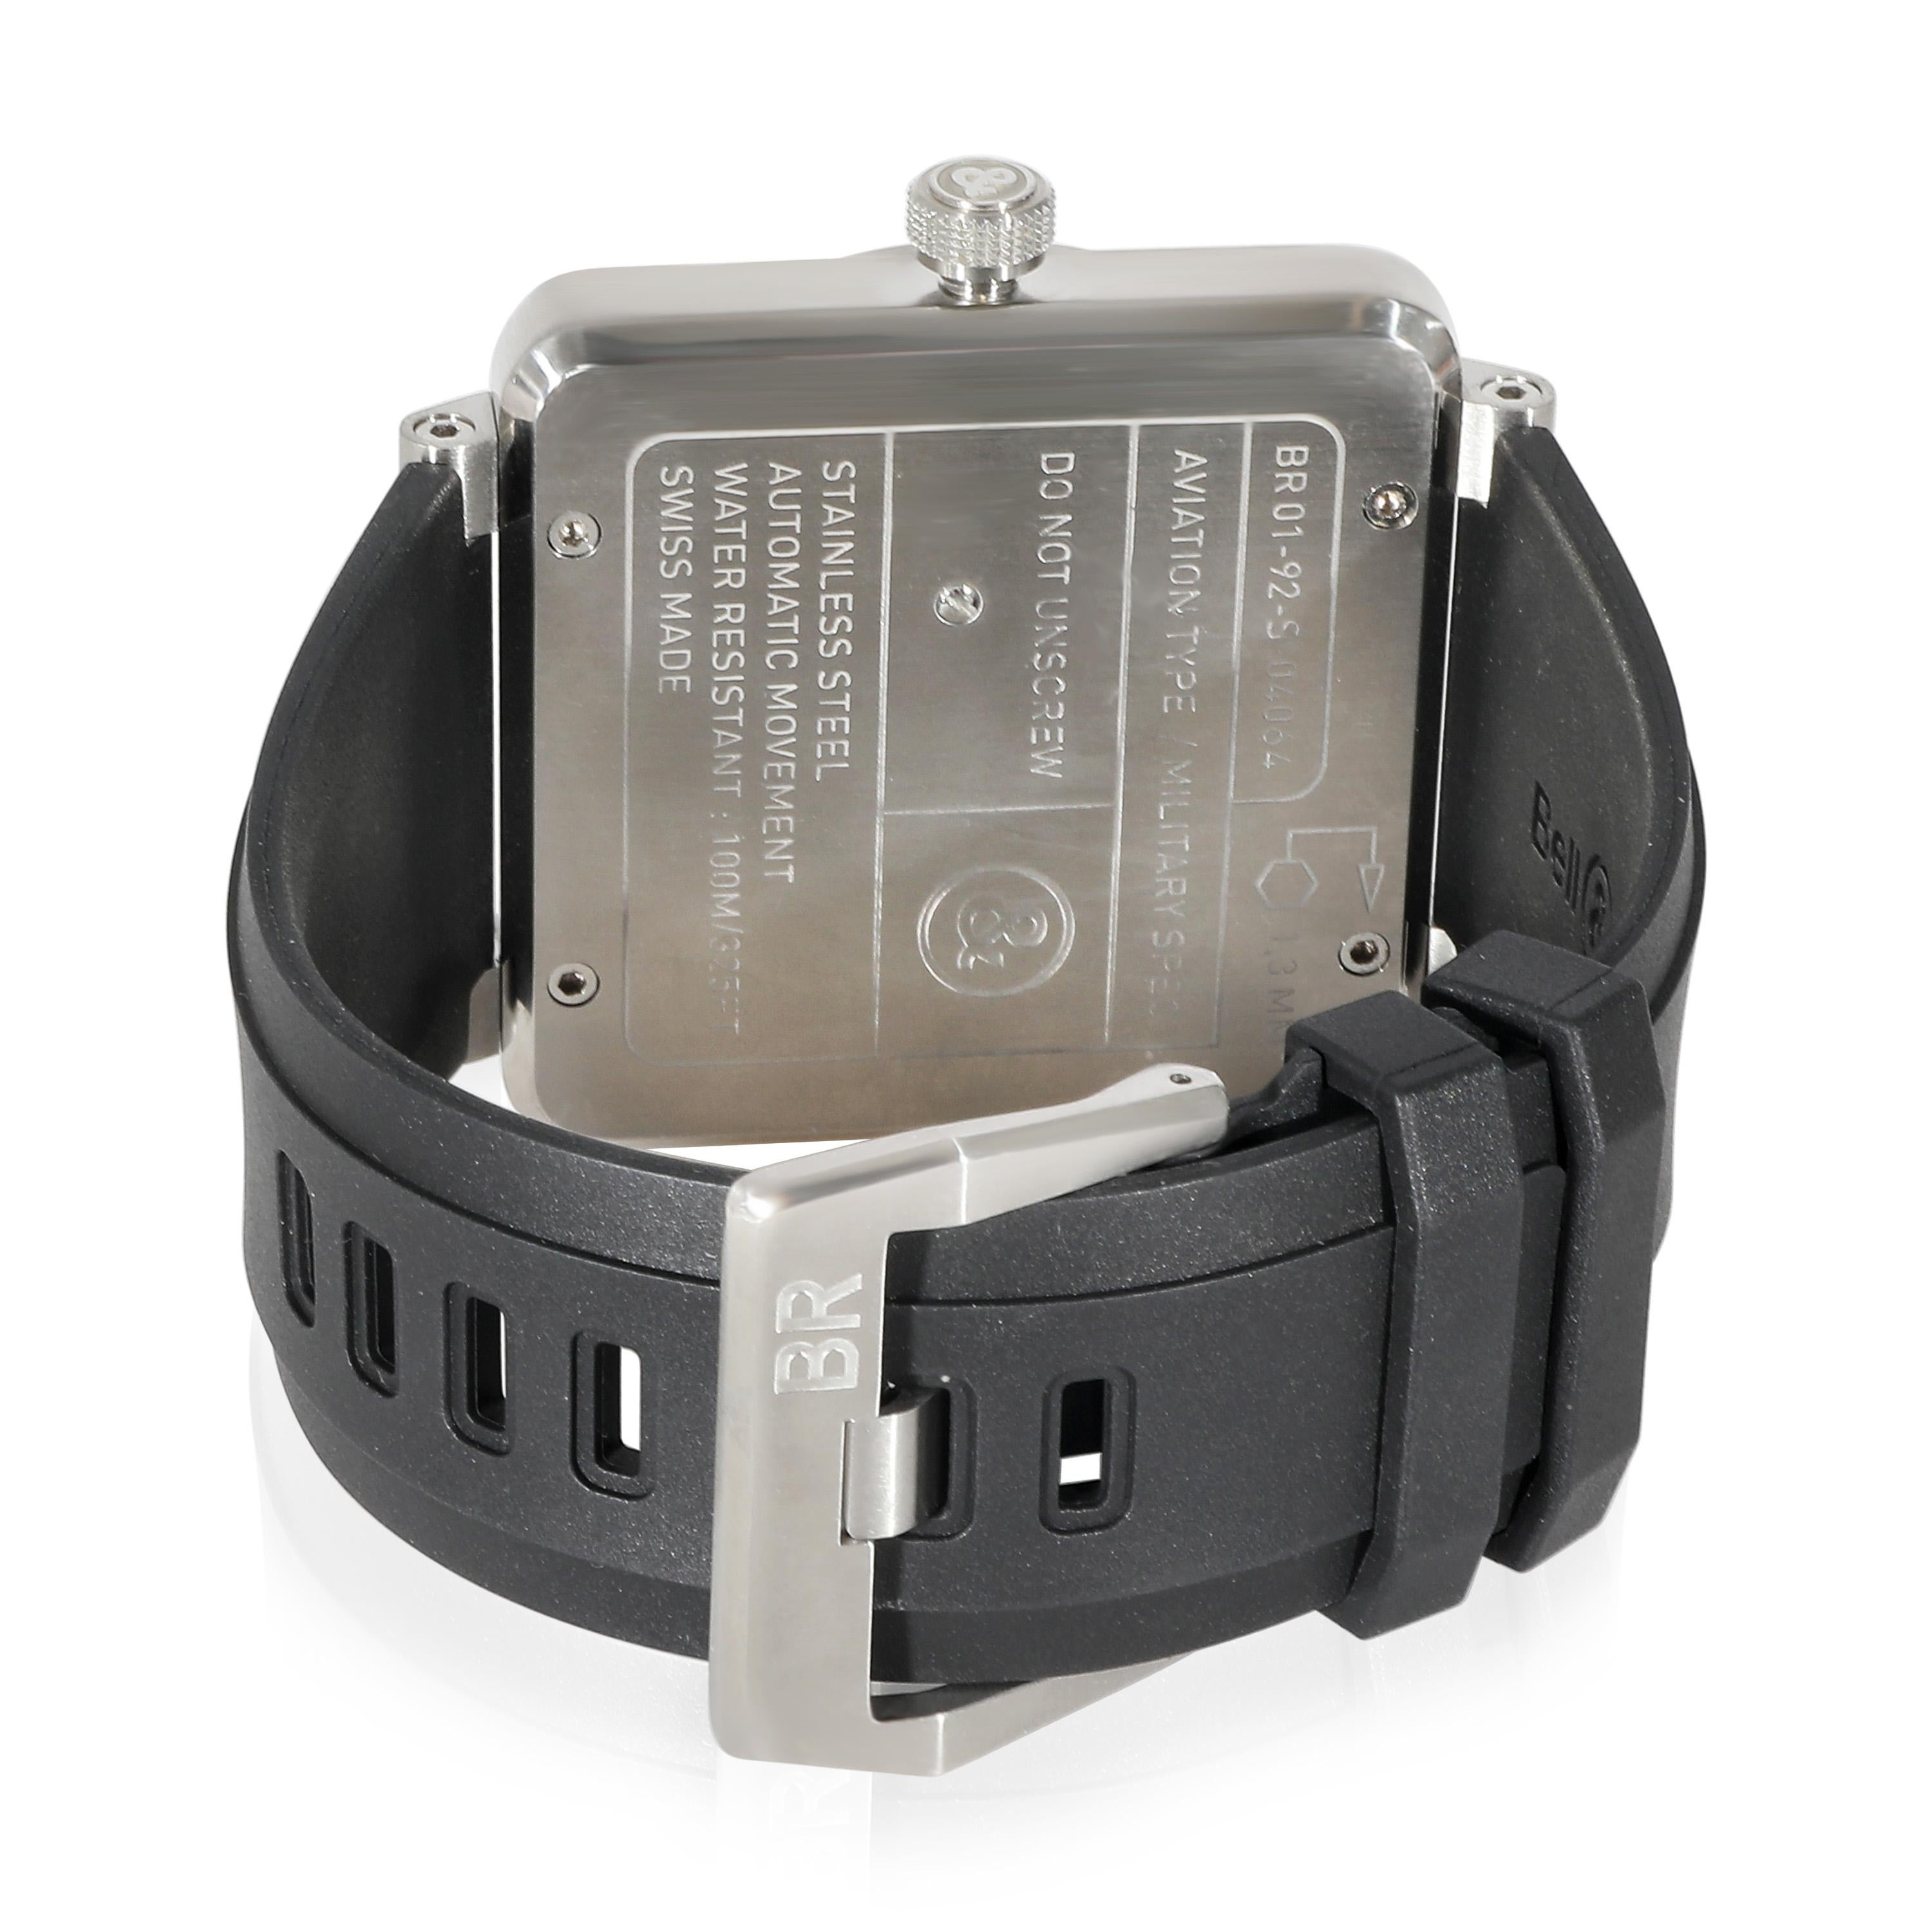 Bell & Ross Aviation BR01-92 Men's Watch in  Stainless Steel

SKU: 133883

PRIMARY DETAILS
Brand: Bell & Ross
Model: Aviation
Country of Origin: Switzerland
Movement Type: Mechanical: Automatic/Kinetic
Year of Manufacture: 2010-2019
Condition: